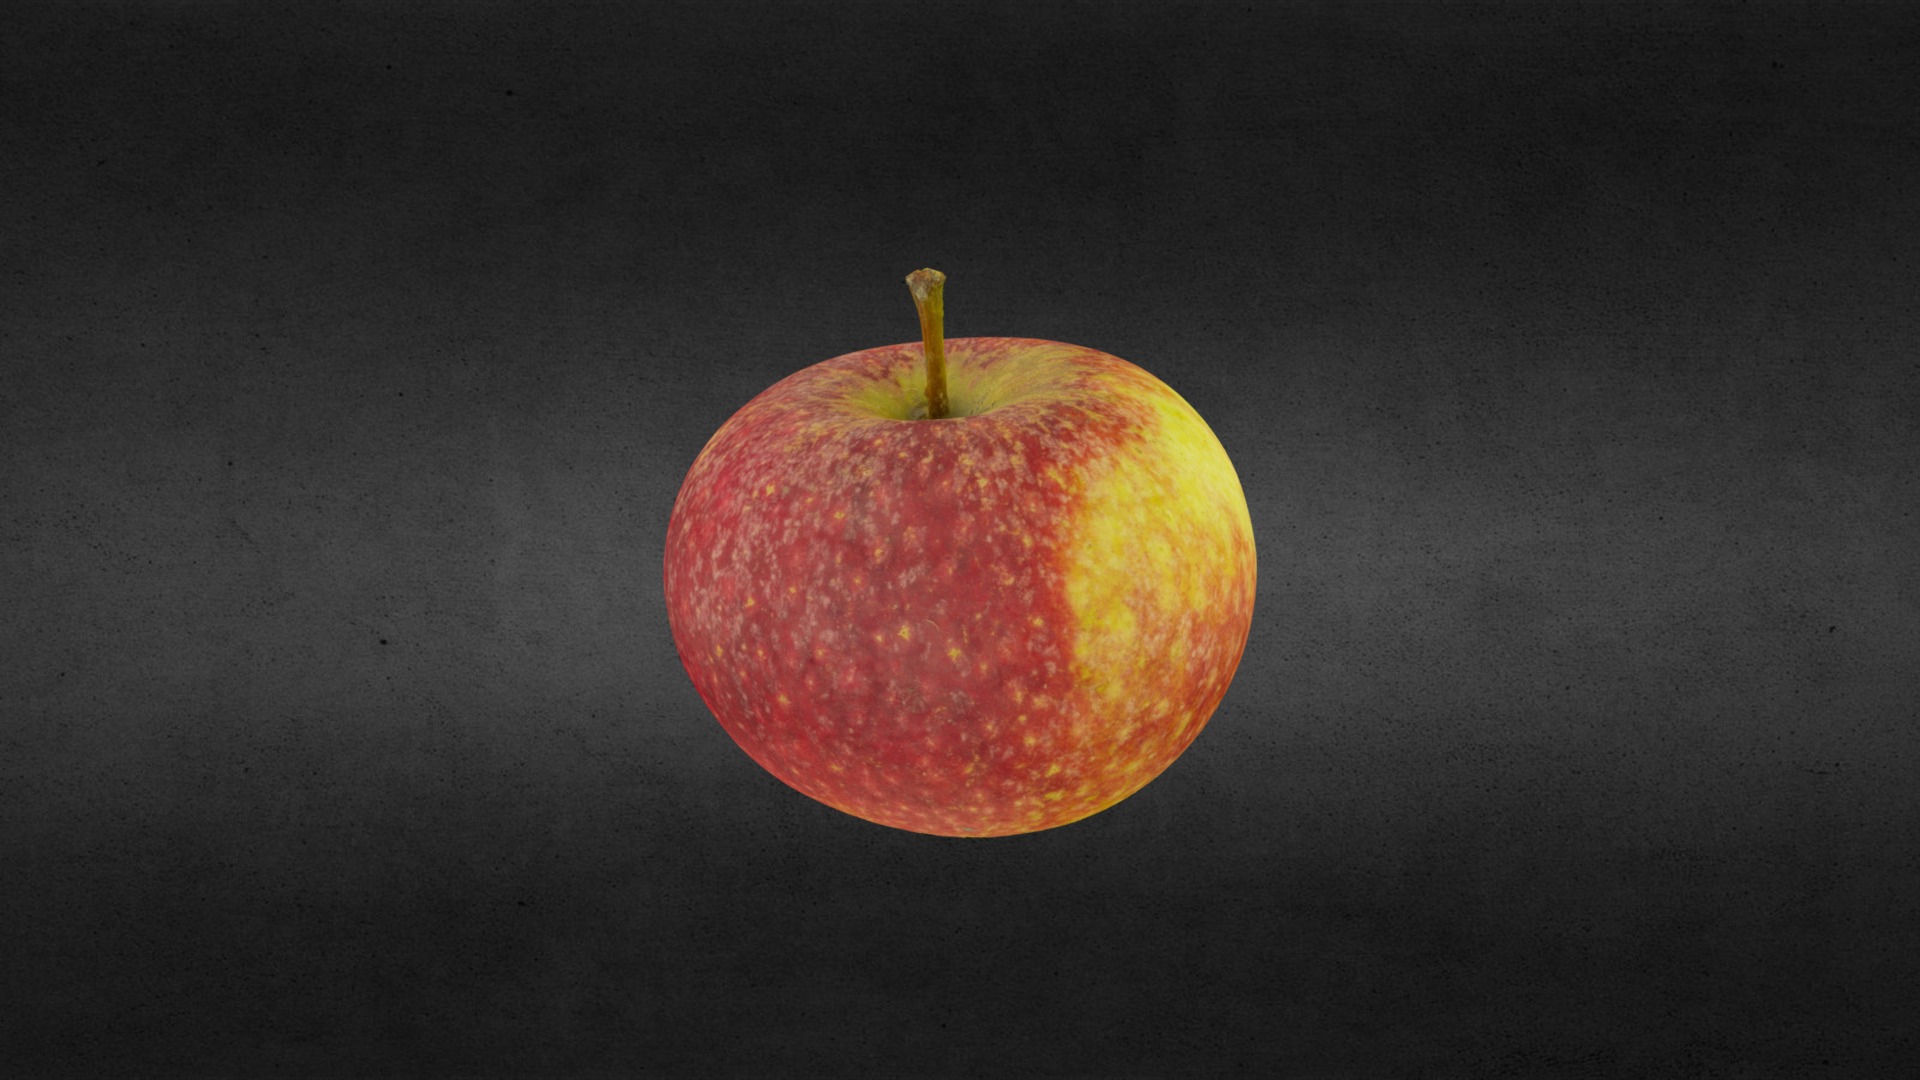 3D model Autumn apple High resolution - This is a 3D model of the Autumn apple High resolution. The 3D model is about a red apple on a black surface.